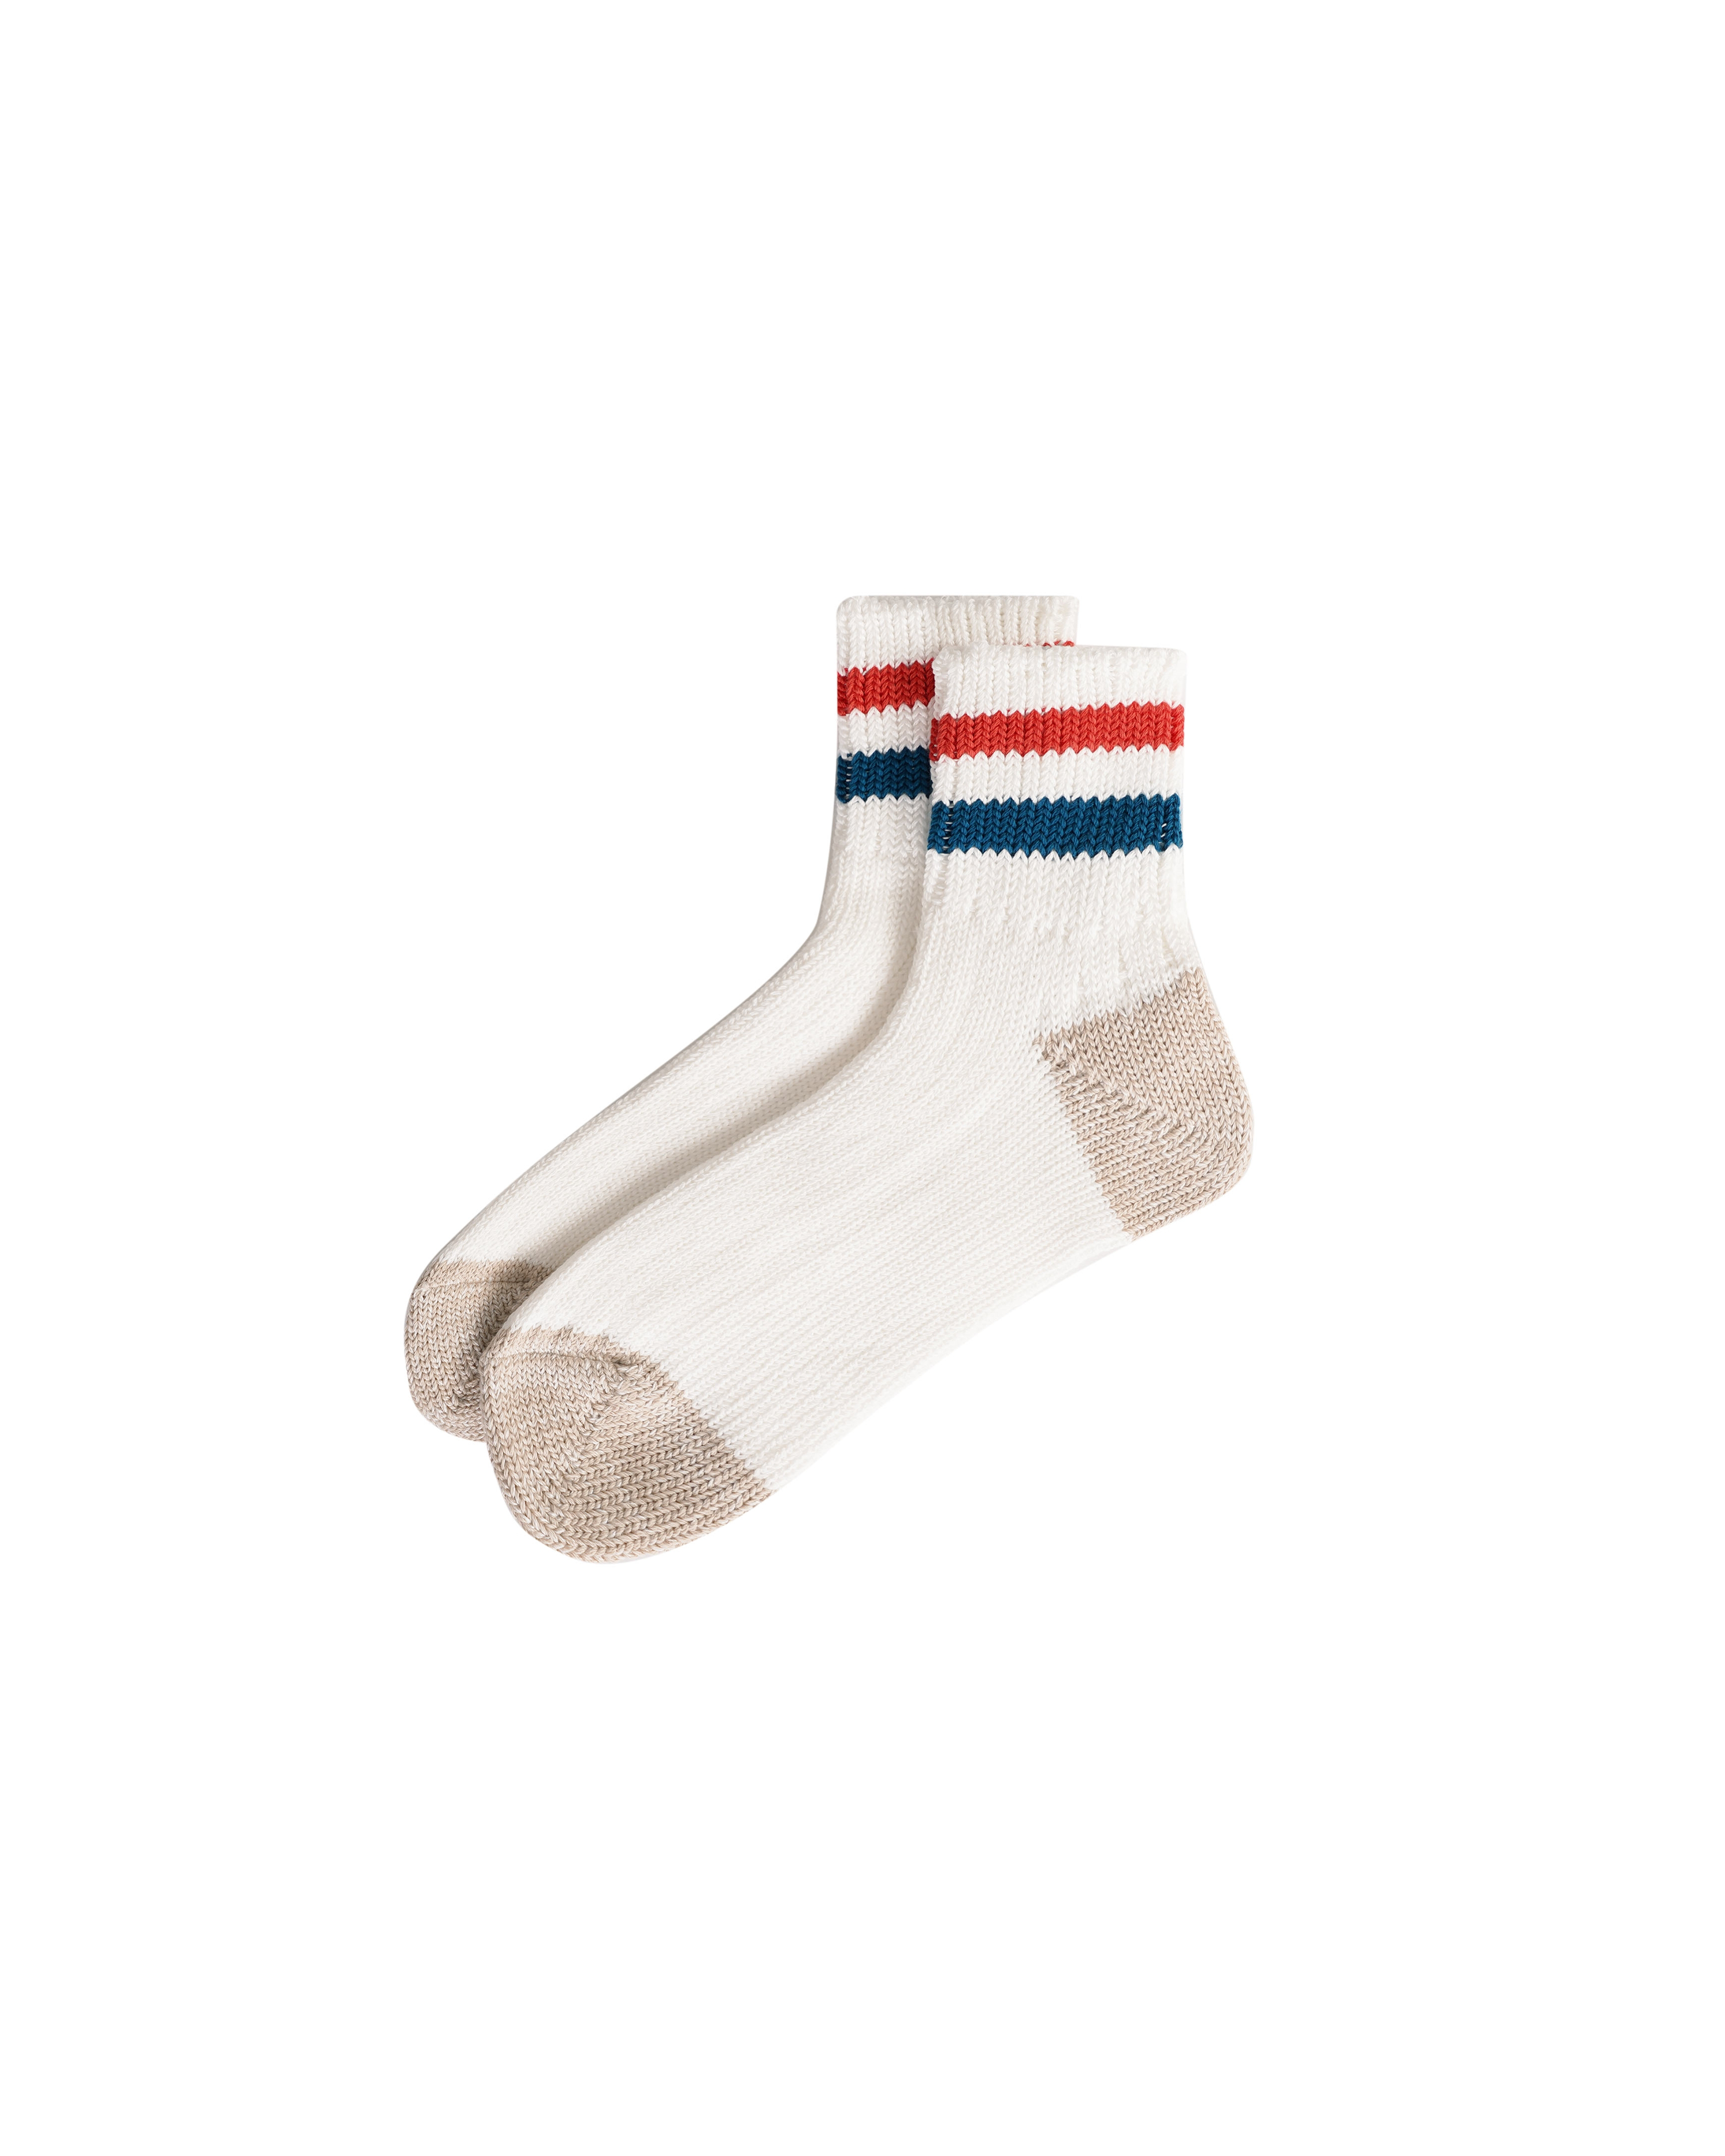 Coarse Ribbed Oldschool Ankle Sock - Red / Blue